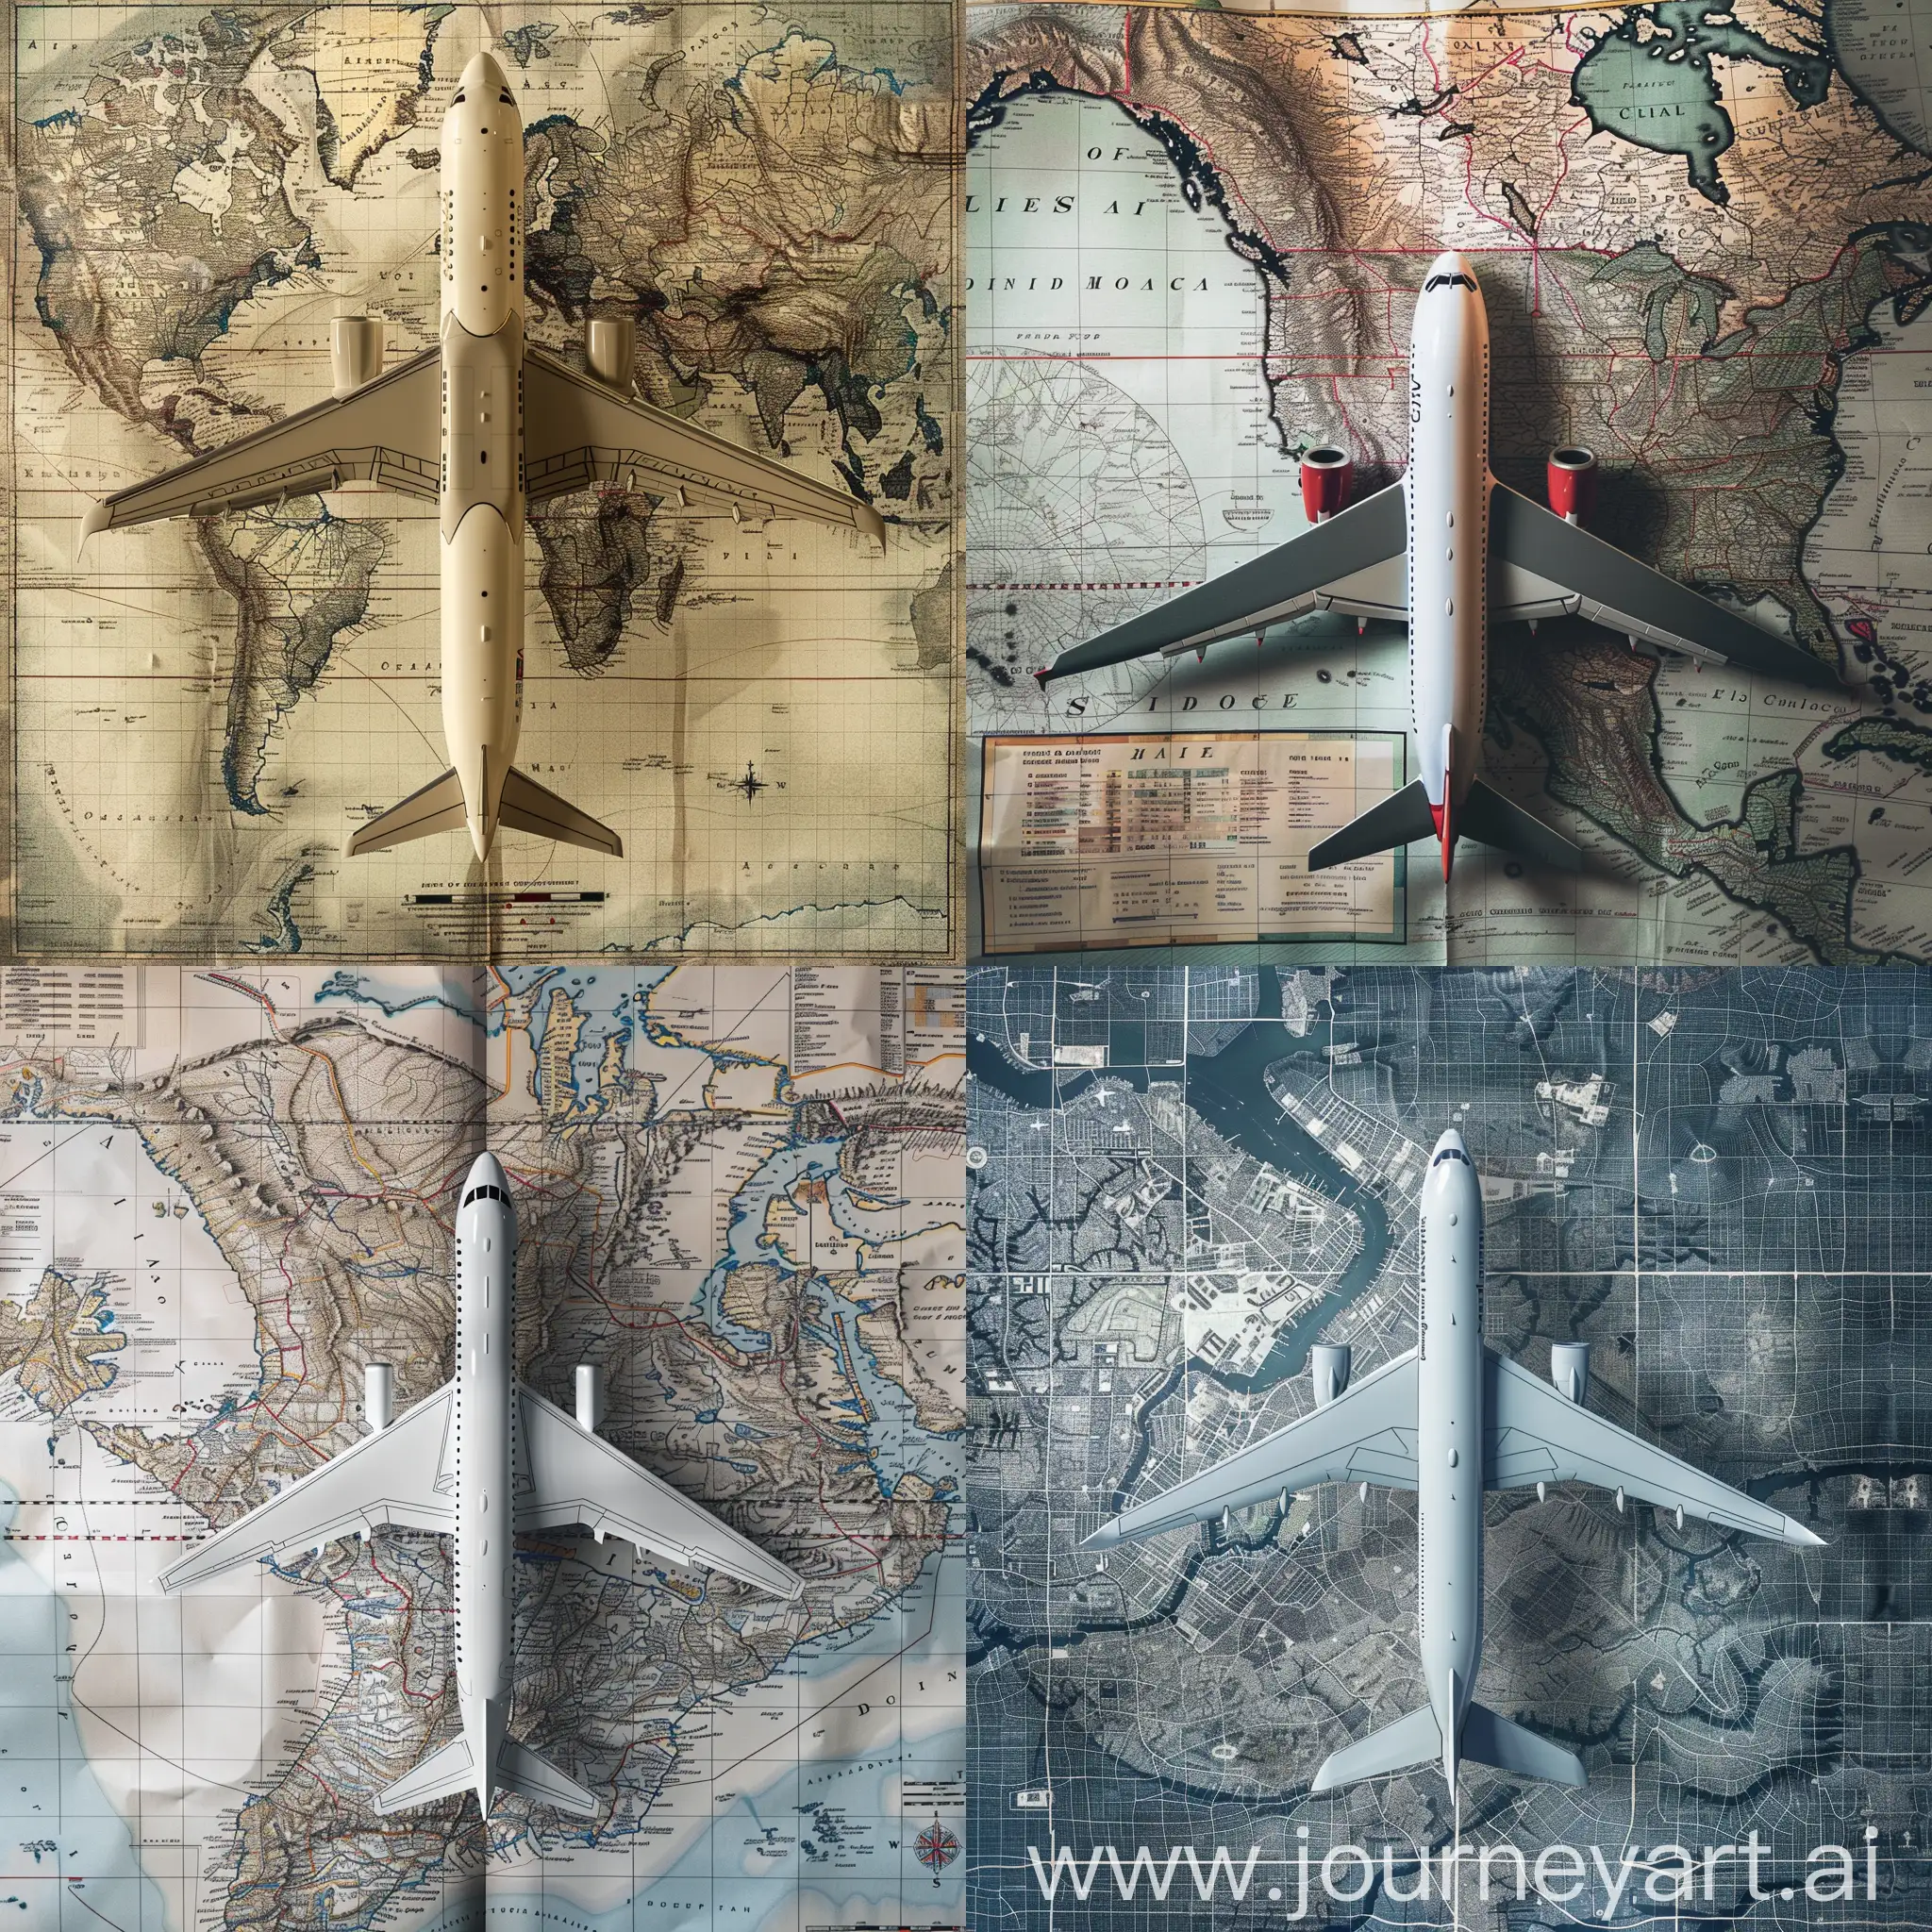 Aerial-Exploration-Airplane-Soaring-Above-Intricate-Map